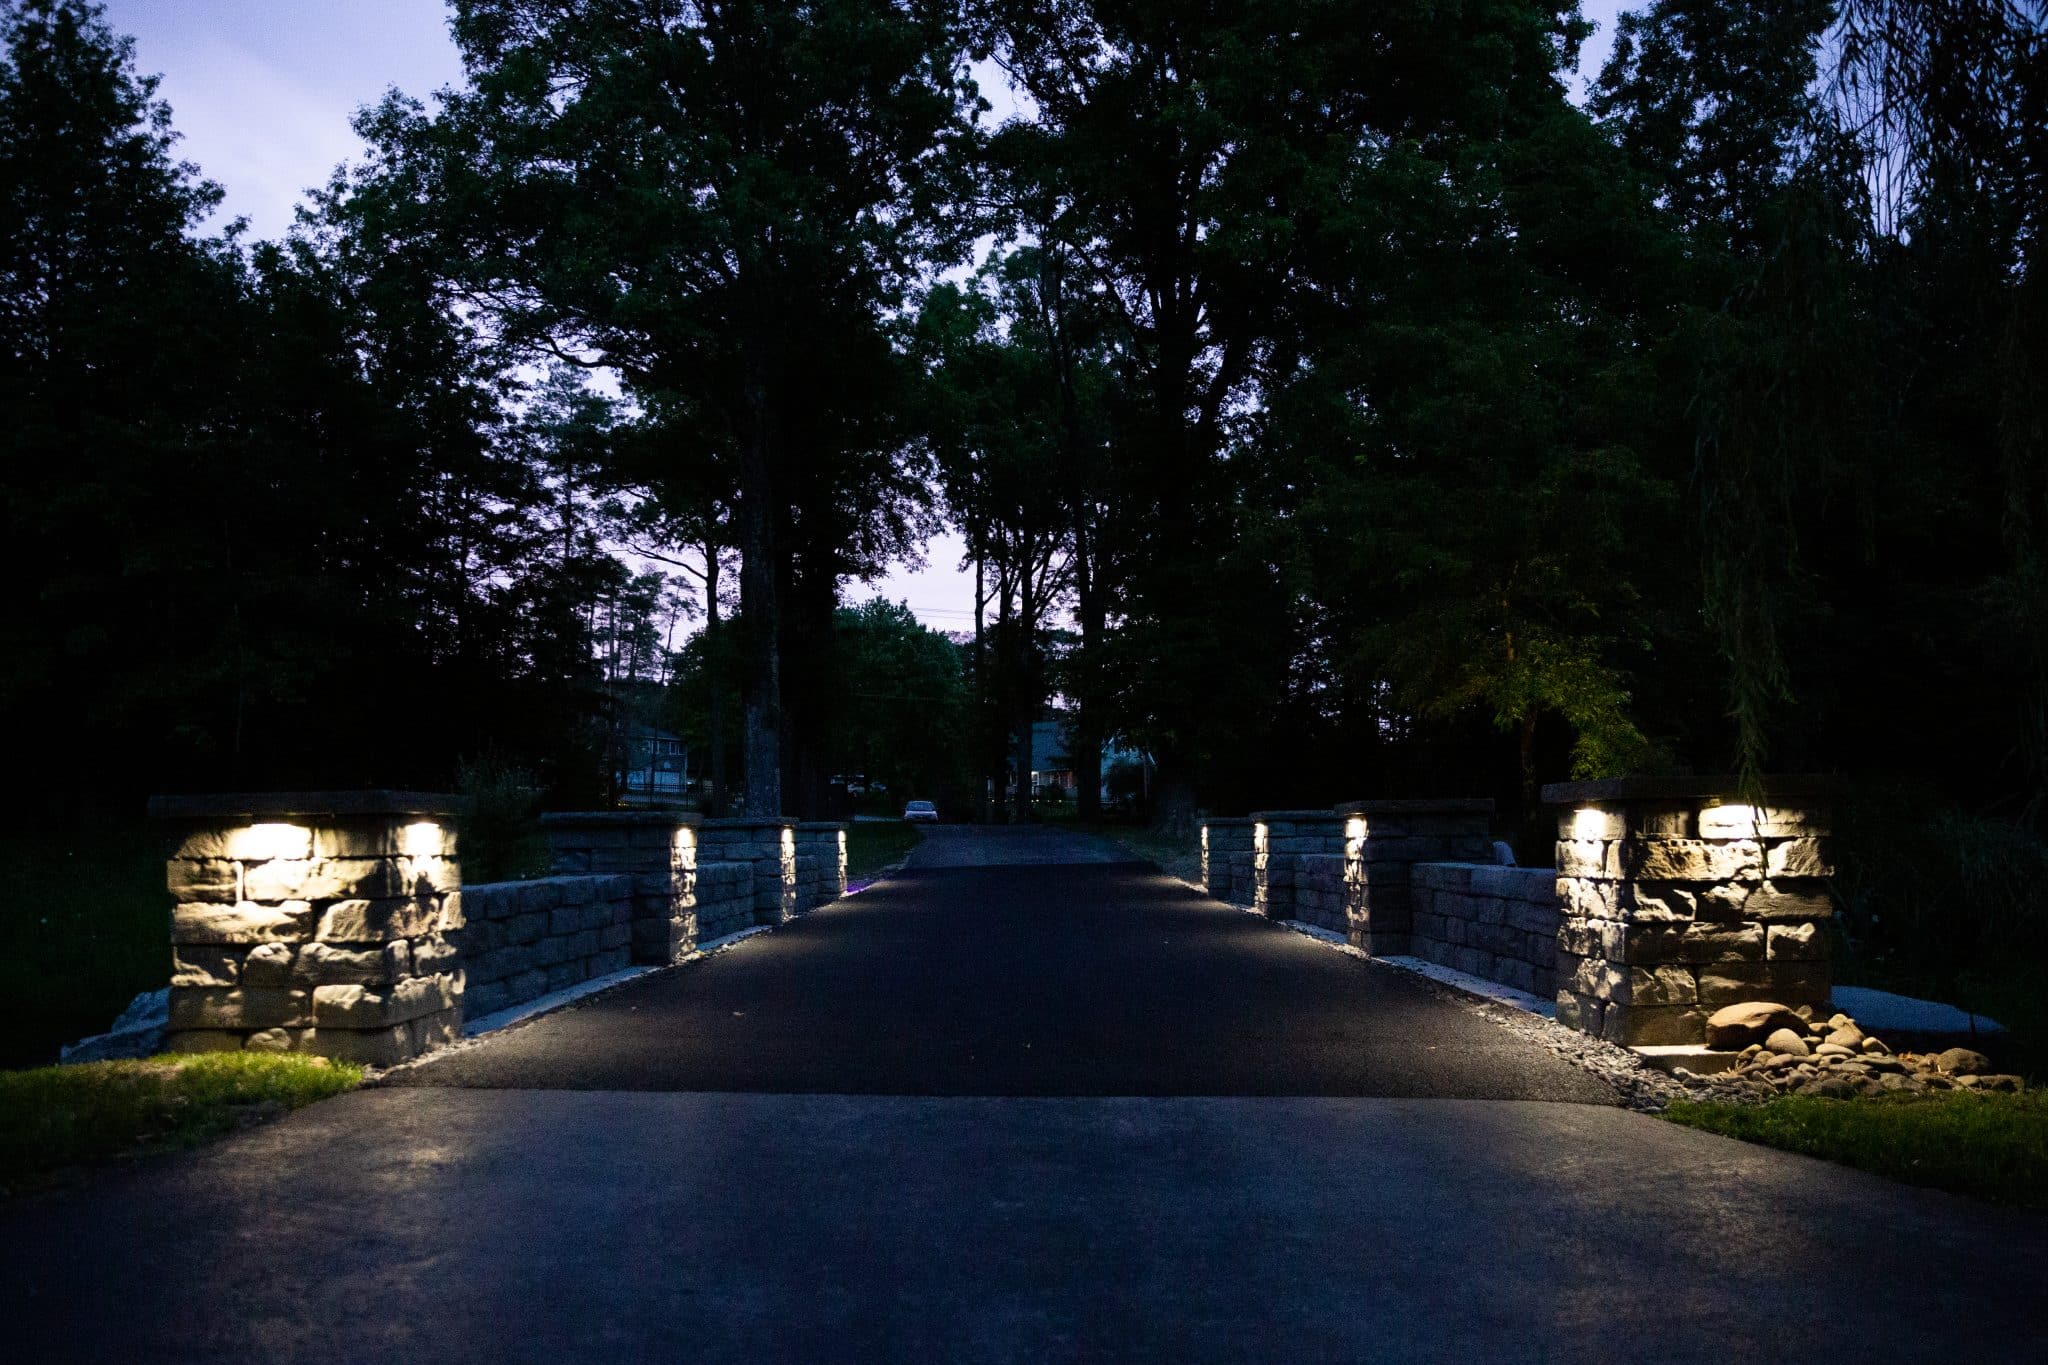 A head-on view of a driveway at night with two precast concrete stone texture retaining walls with pillars on either side. The scene is lit by outdoor lighting installed on each pillar. Designed and installed by Masseo Landscape, Inc, New Paltz Landscapers.